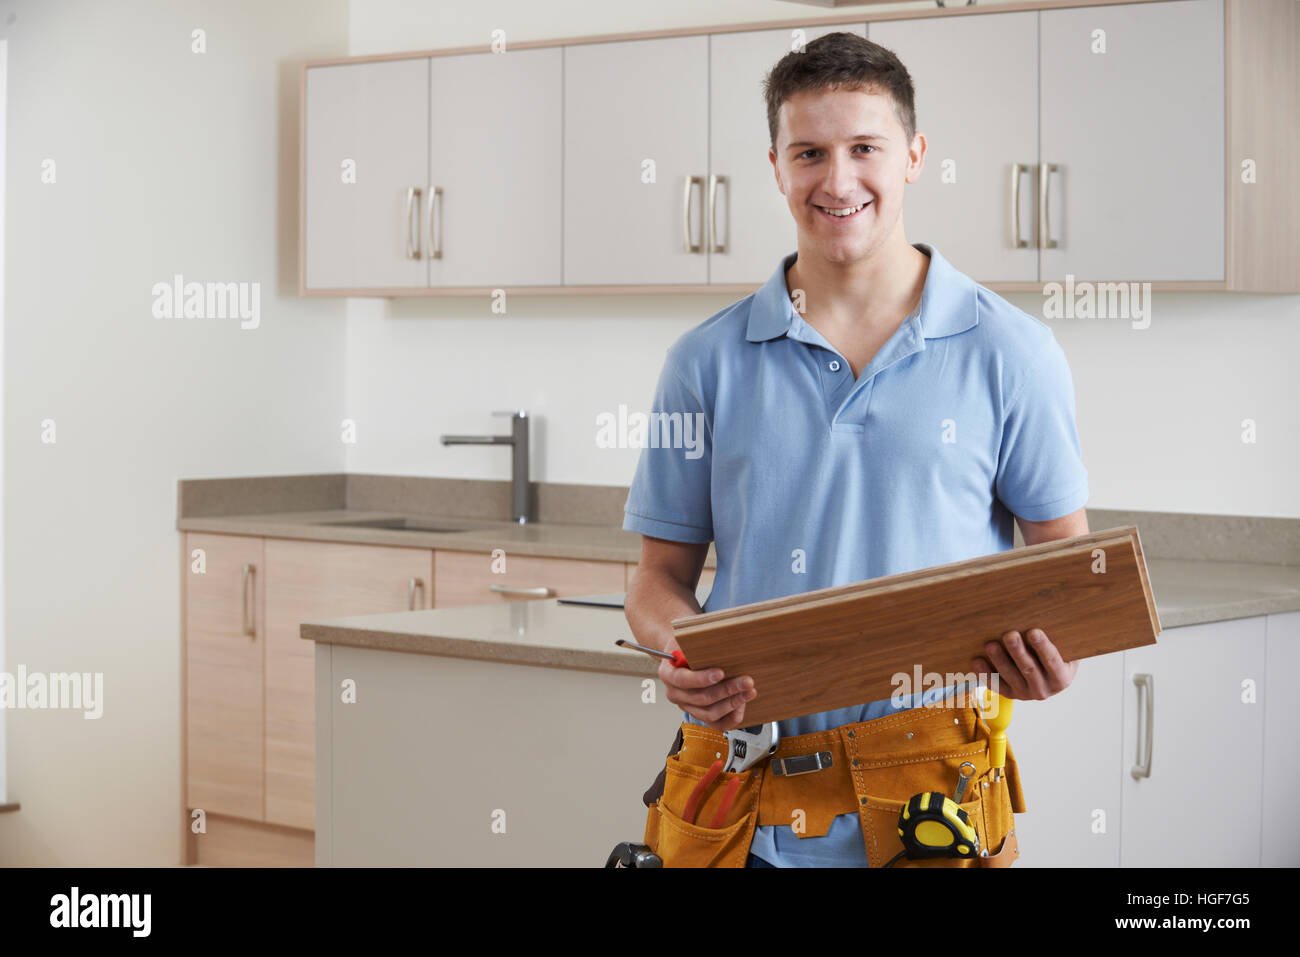 Portrait Of Carpenter Installing Fitted Kitchen Stock Photo